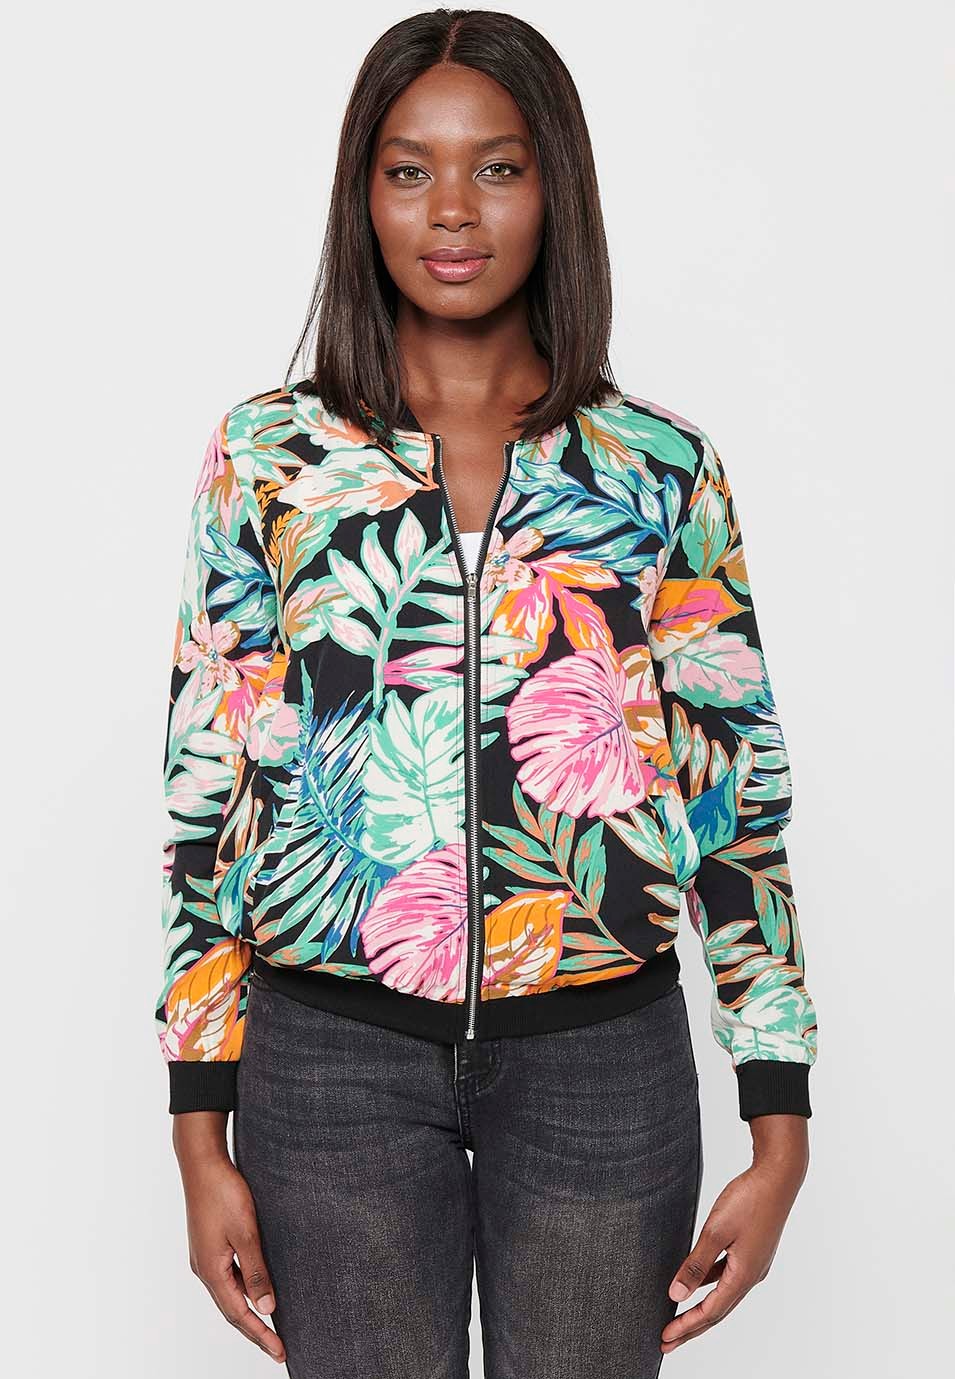 Long-sleeved sweatshirt jacket with ribbed finishes and floral print with front zipper closure. Composition 100% Polyester. Multicolor Color for Women from the Koröshi brand 1